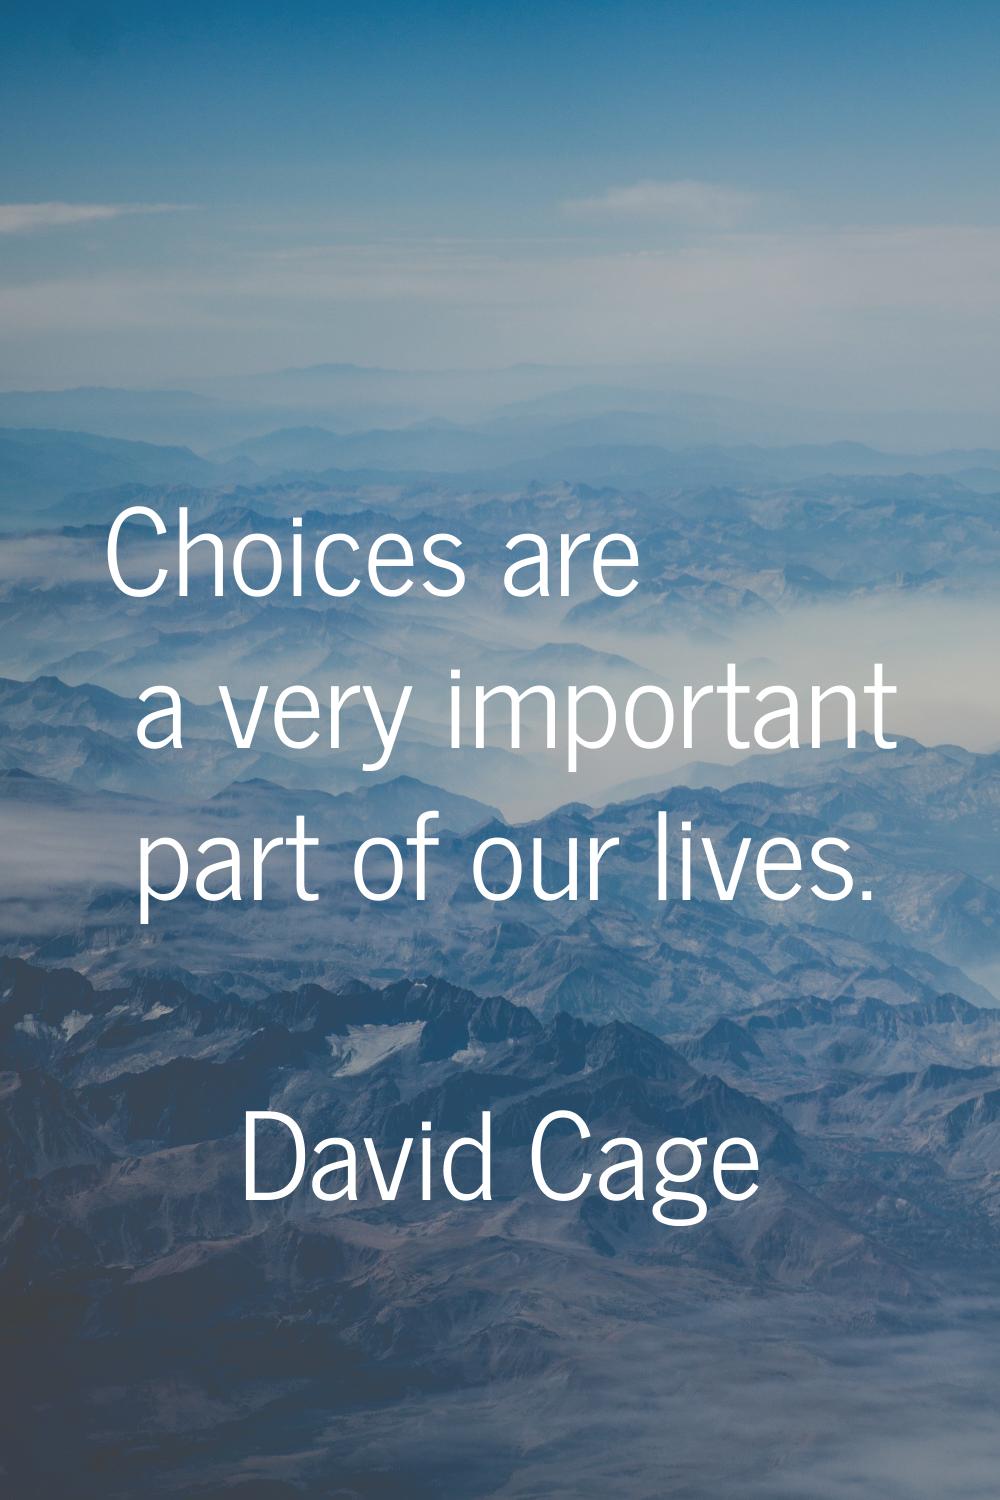 Choices are a very important part of our lives.